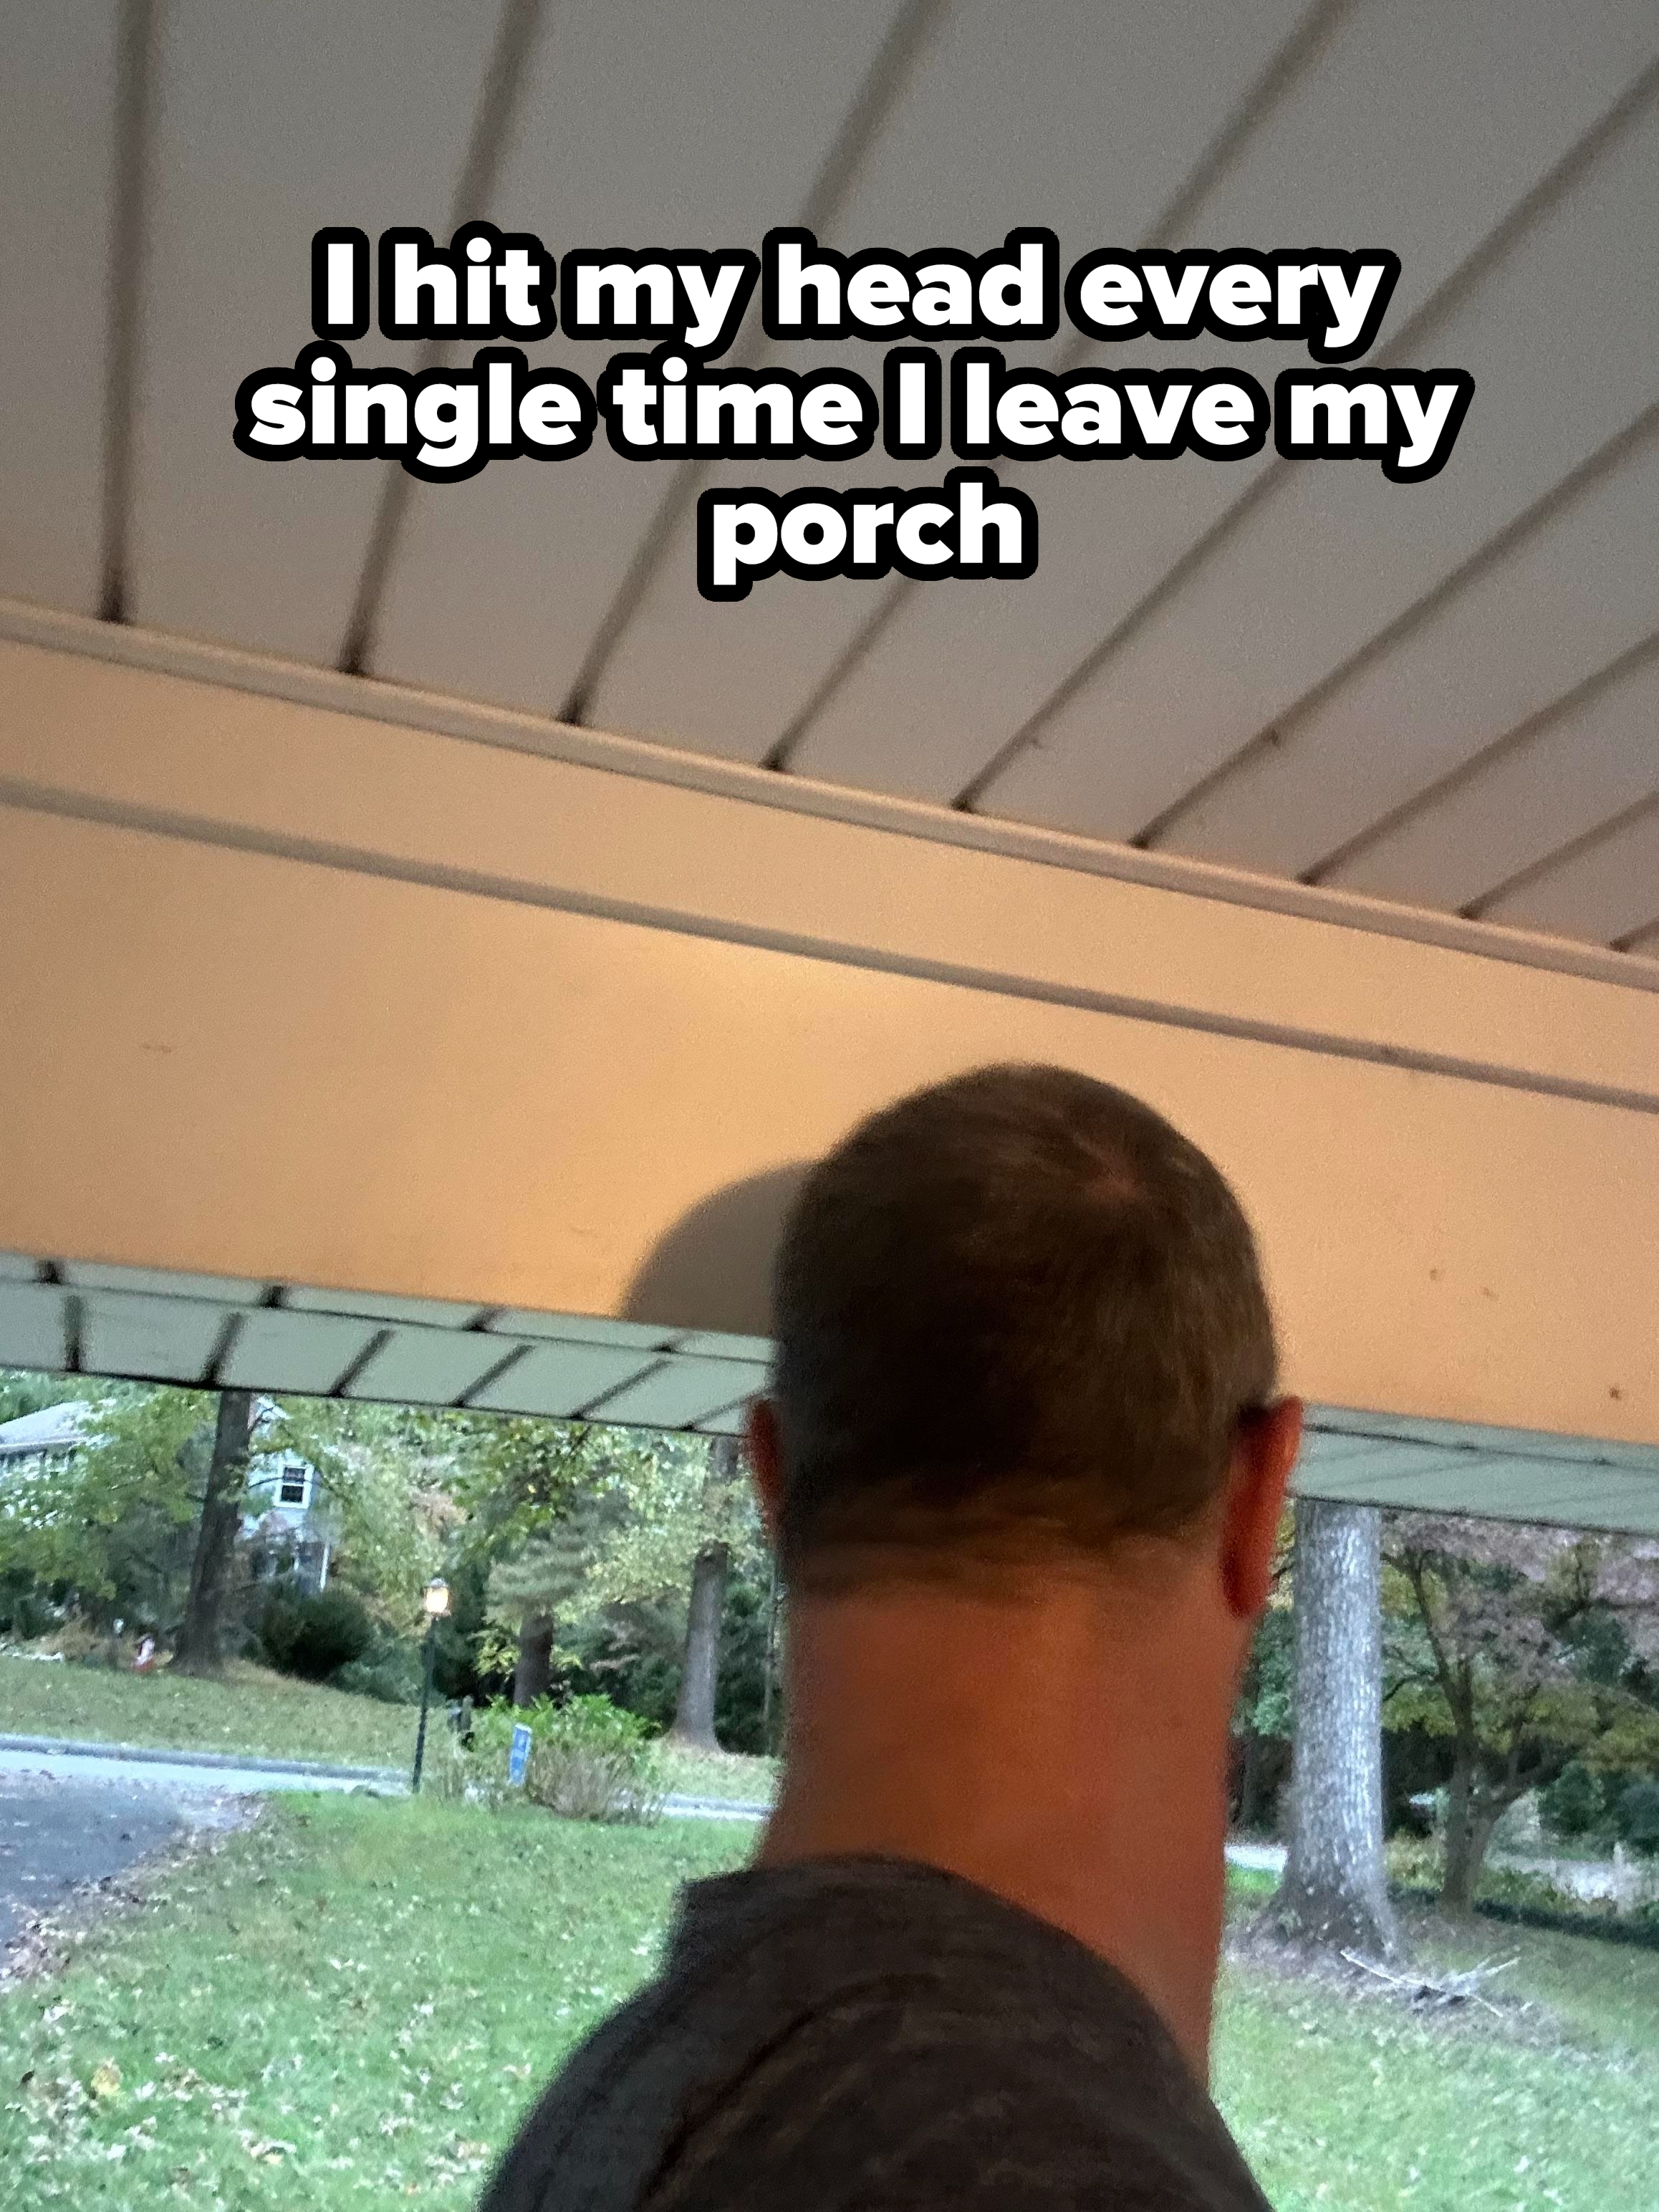 &quot;I hit my head every single time I leave my porch,&quot; showing a man who&#x27;s too tall for the ceiling of his porch